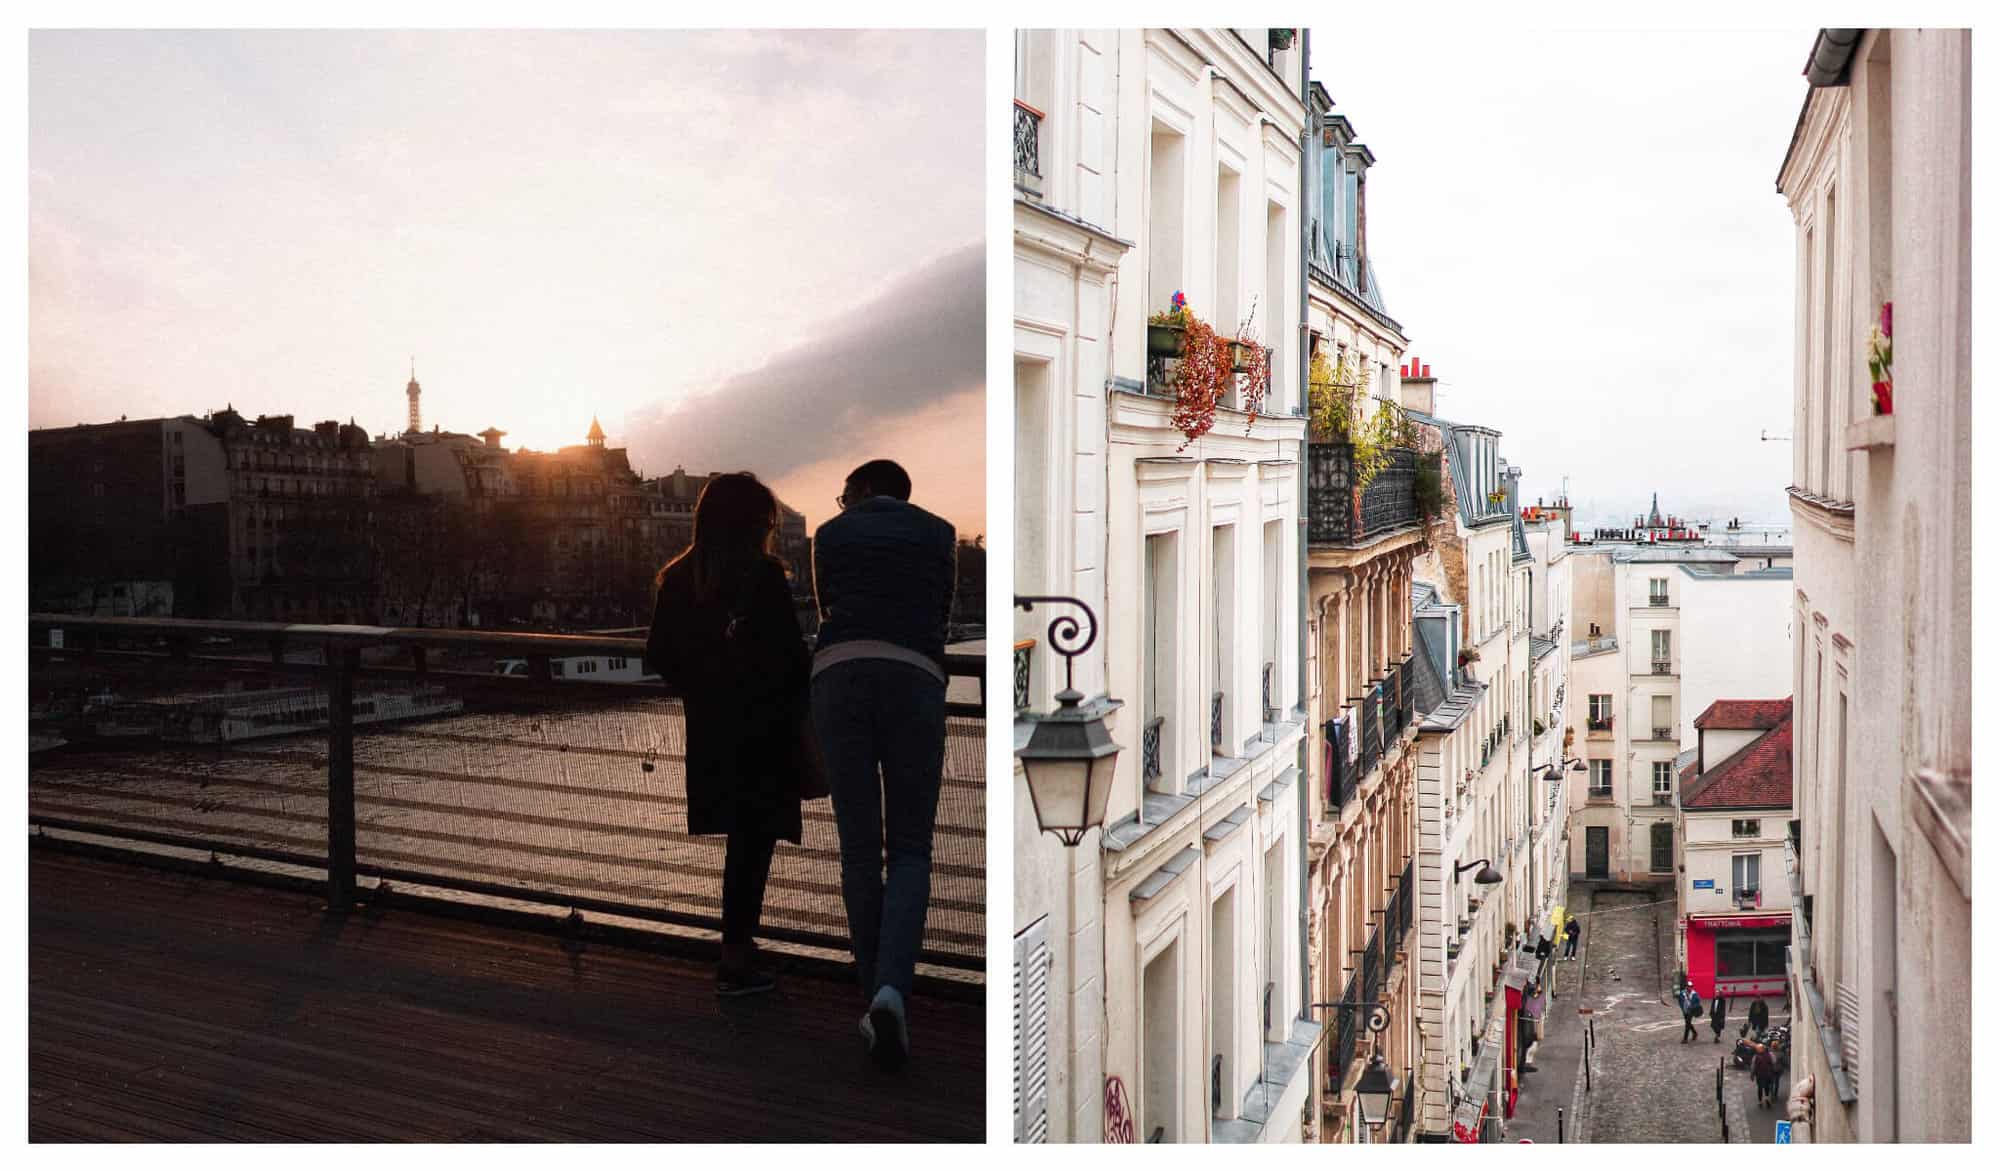 Left: A couple lean on a railing of a bridge overlooking the Seine river just past golden hour. Right: A view of a bright yet foggy day in Montmartre, looking down the hill of a street.